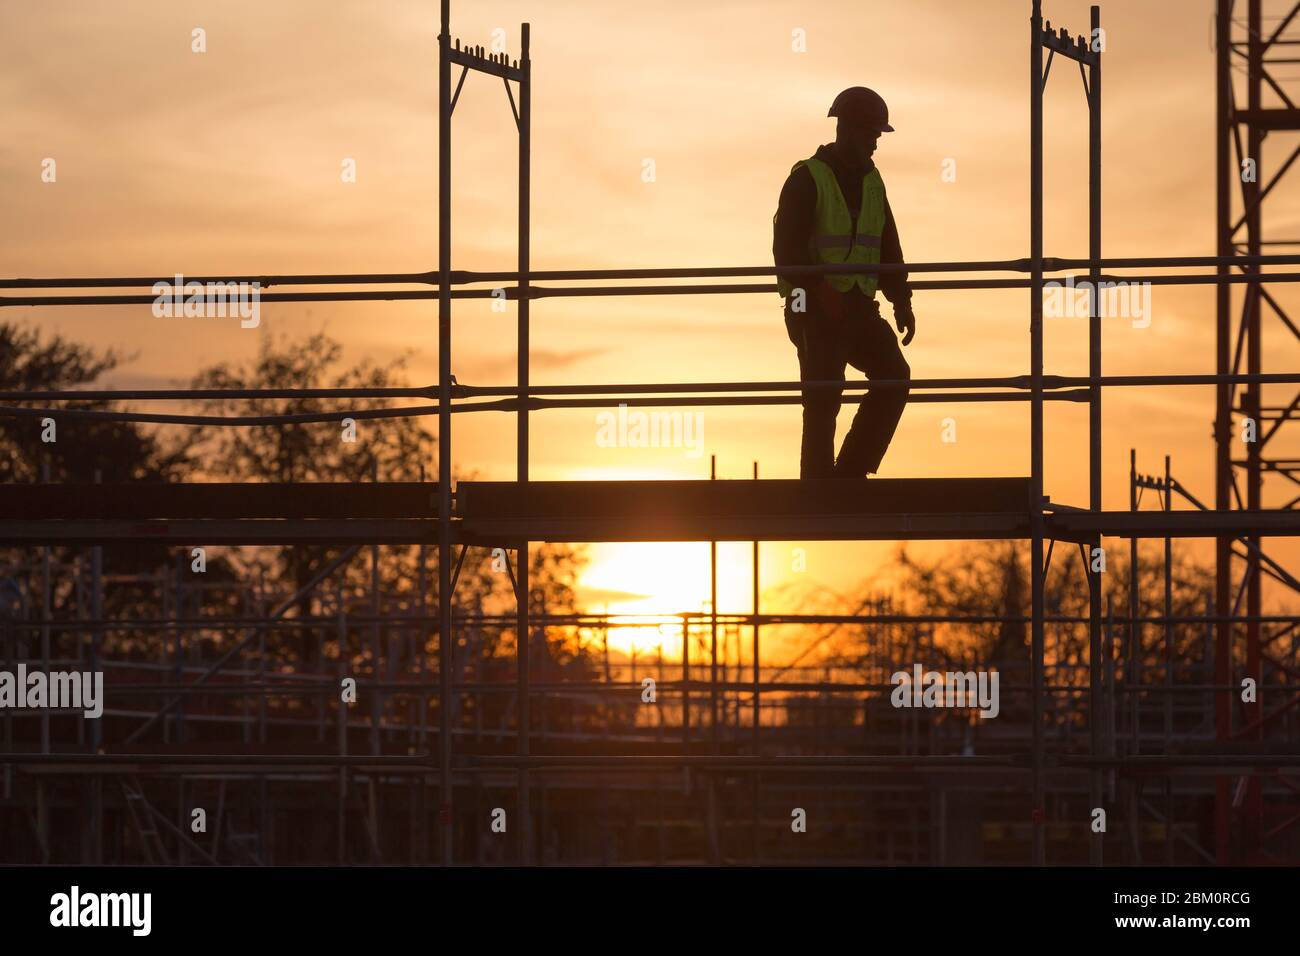 worker on scaffolding at sunset Stock Photo